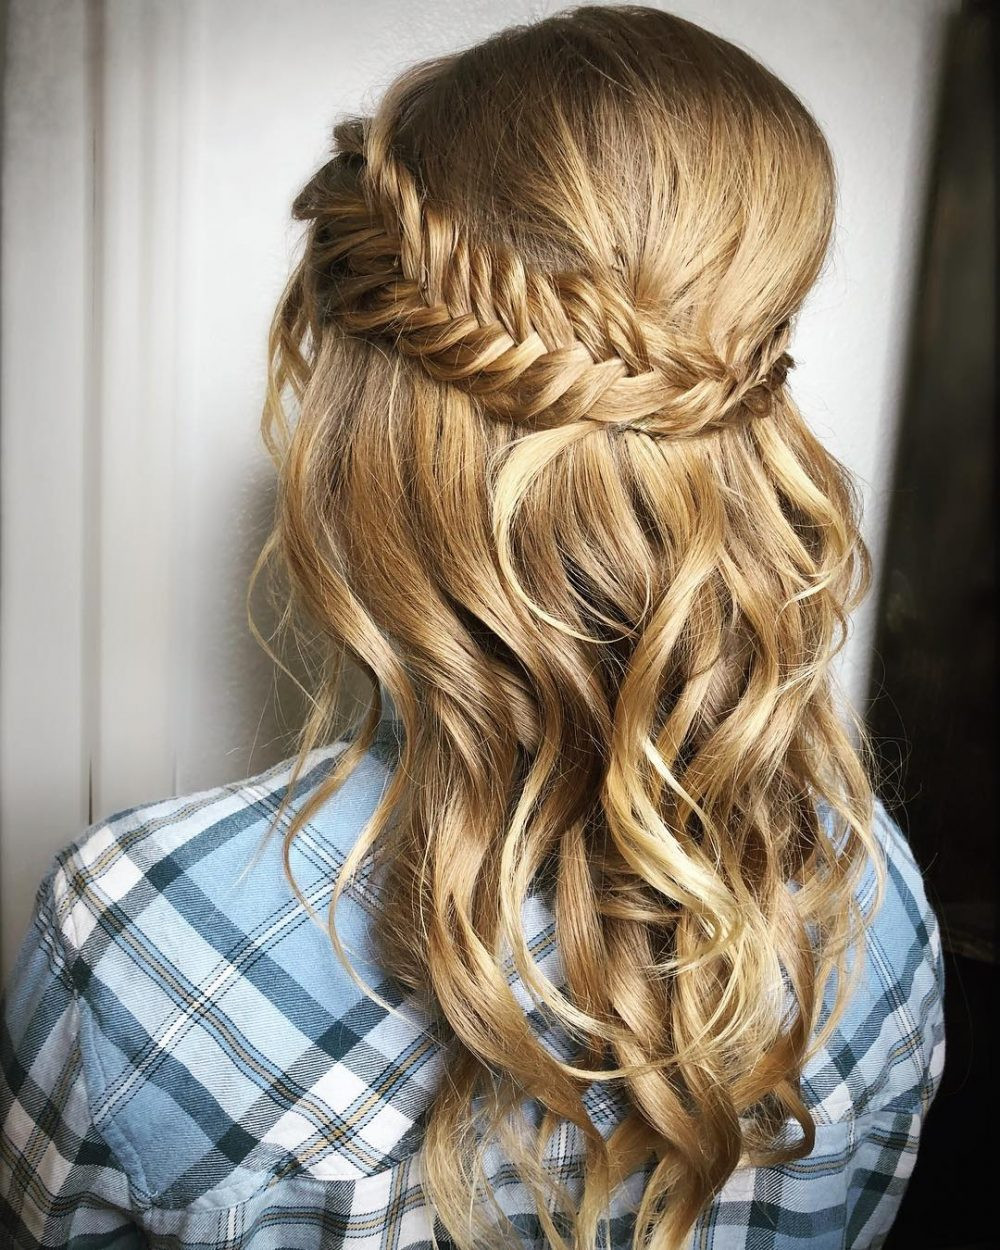 Prom Hairstyles 2020 Down
 27 Prettiest Half Up Half Down Prom Hairstyles for 2020